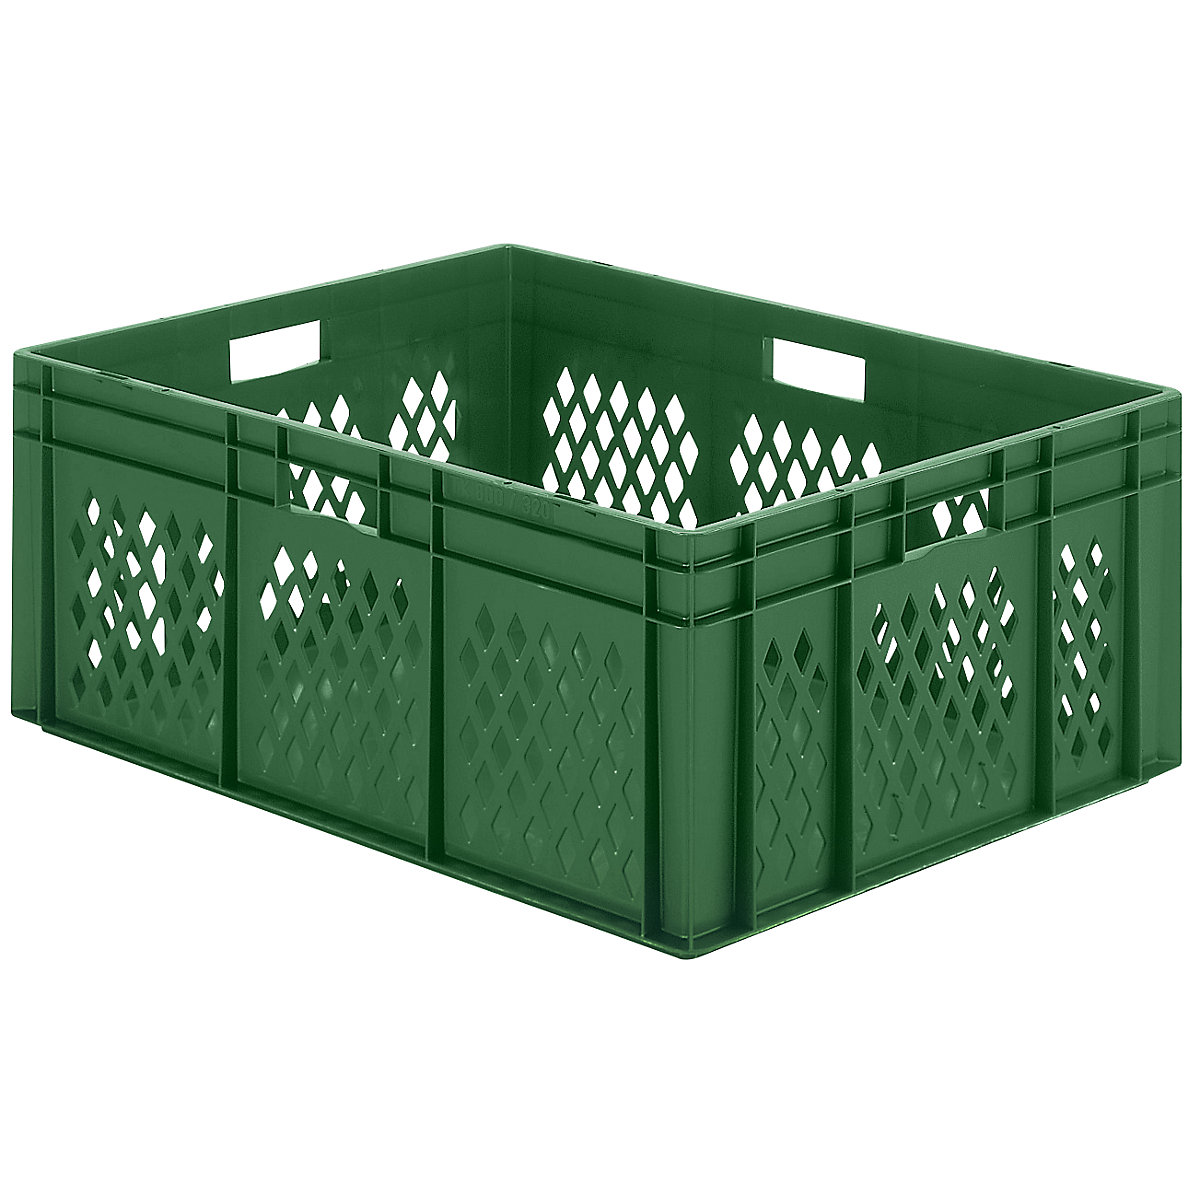 Euro stacking container, perforated walls, closed base, LxWxH 800 x 600 x 320 mm, green, pack of 2